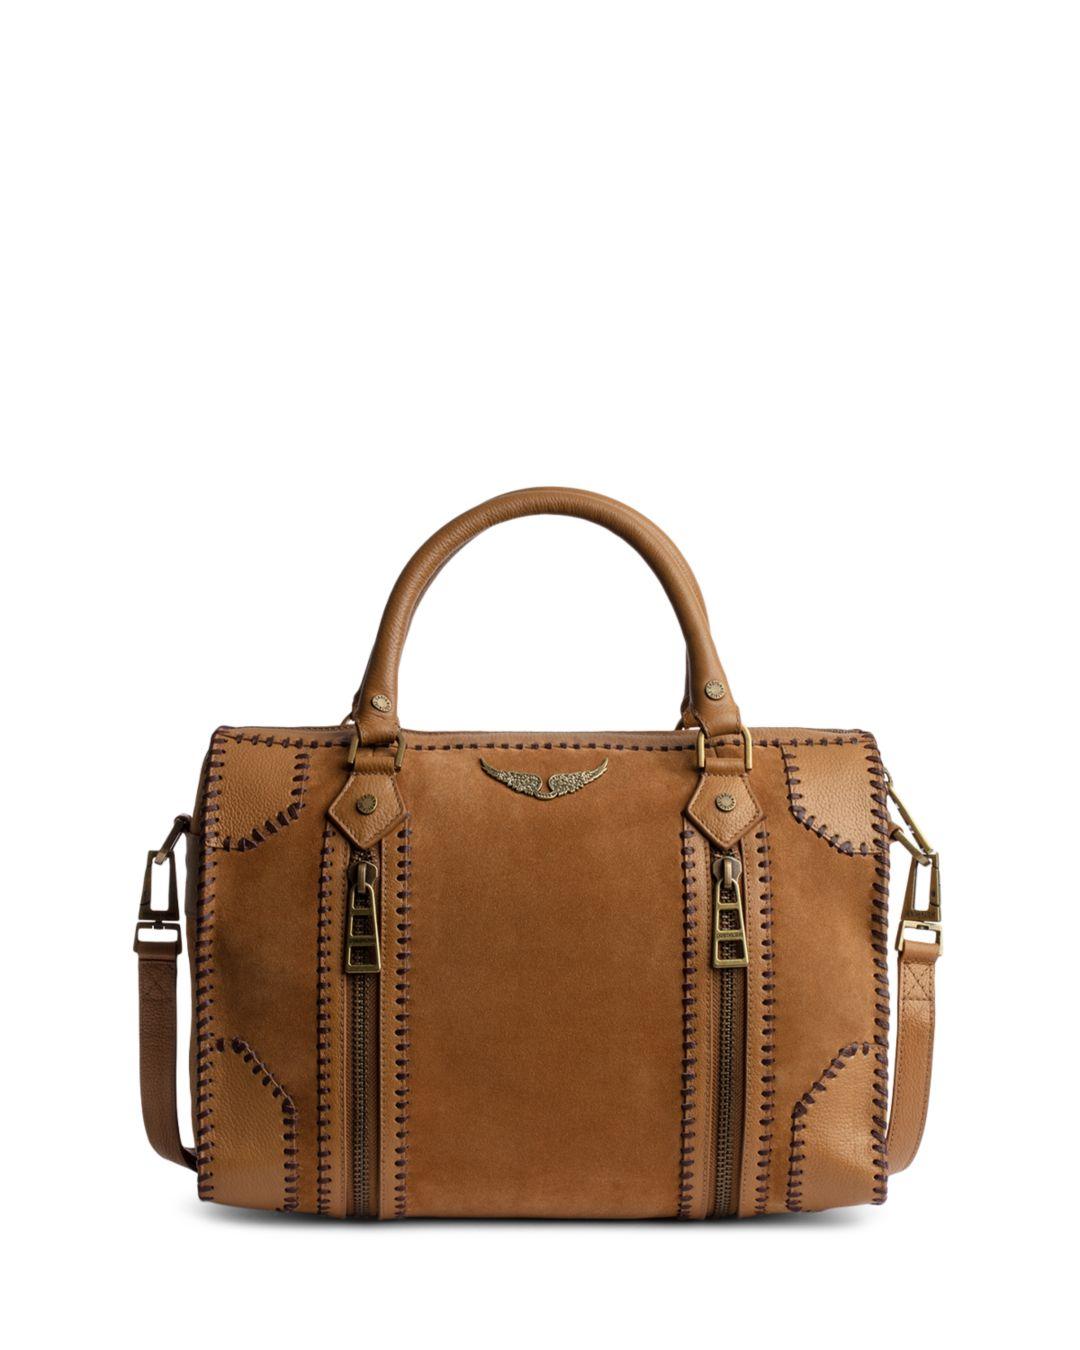 Zadig & Voltaire Sunny Medium Leather Bag in Brown | Lyst